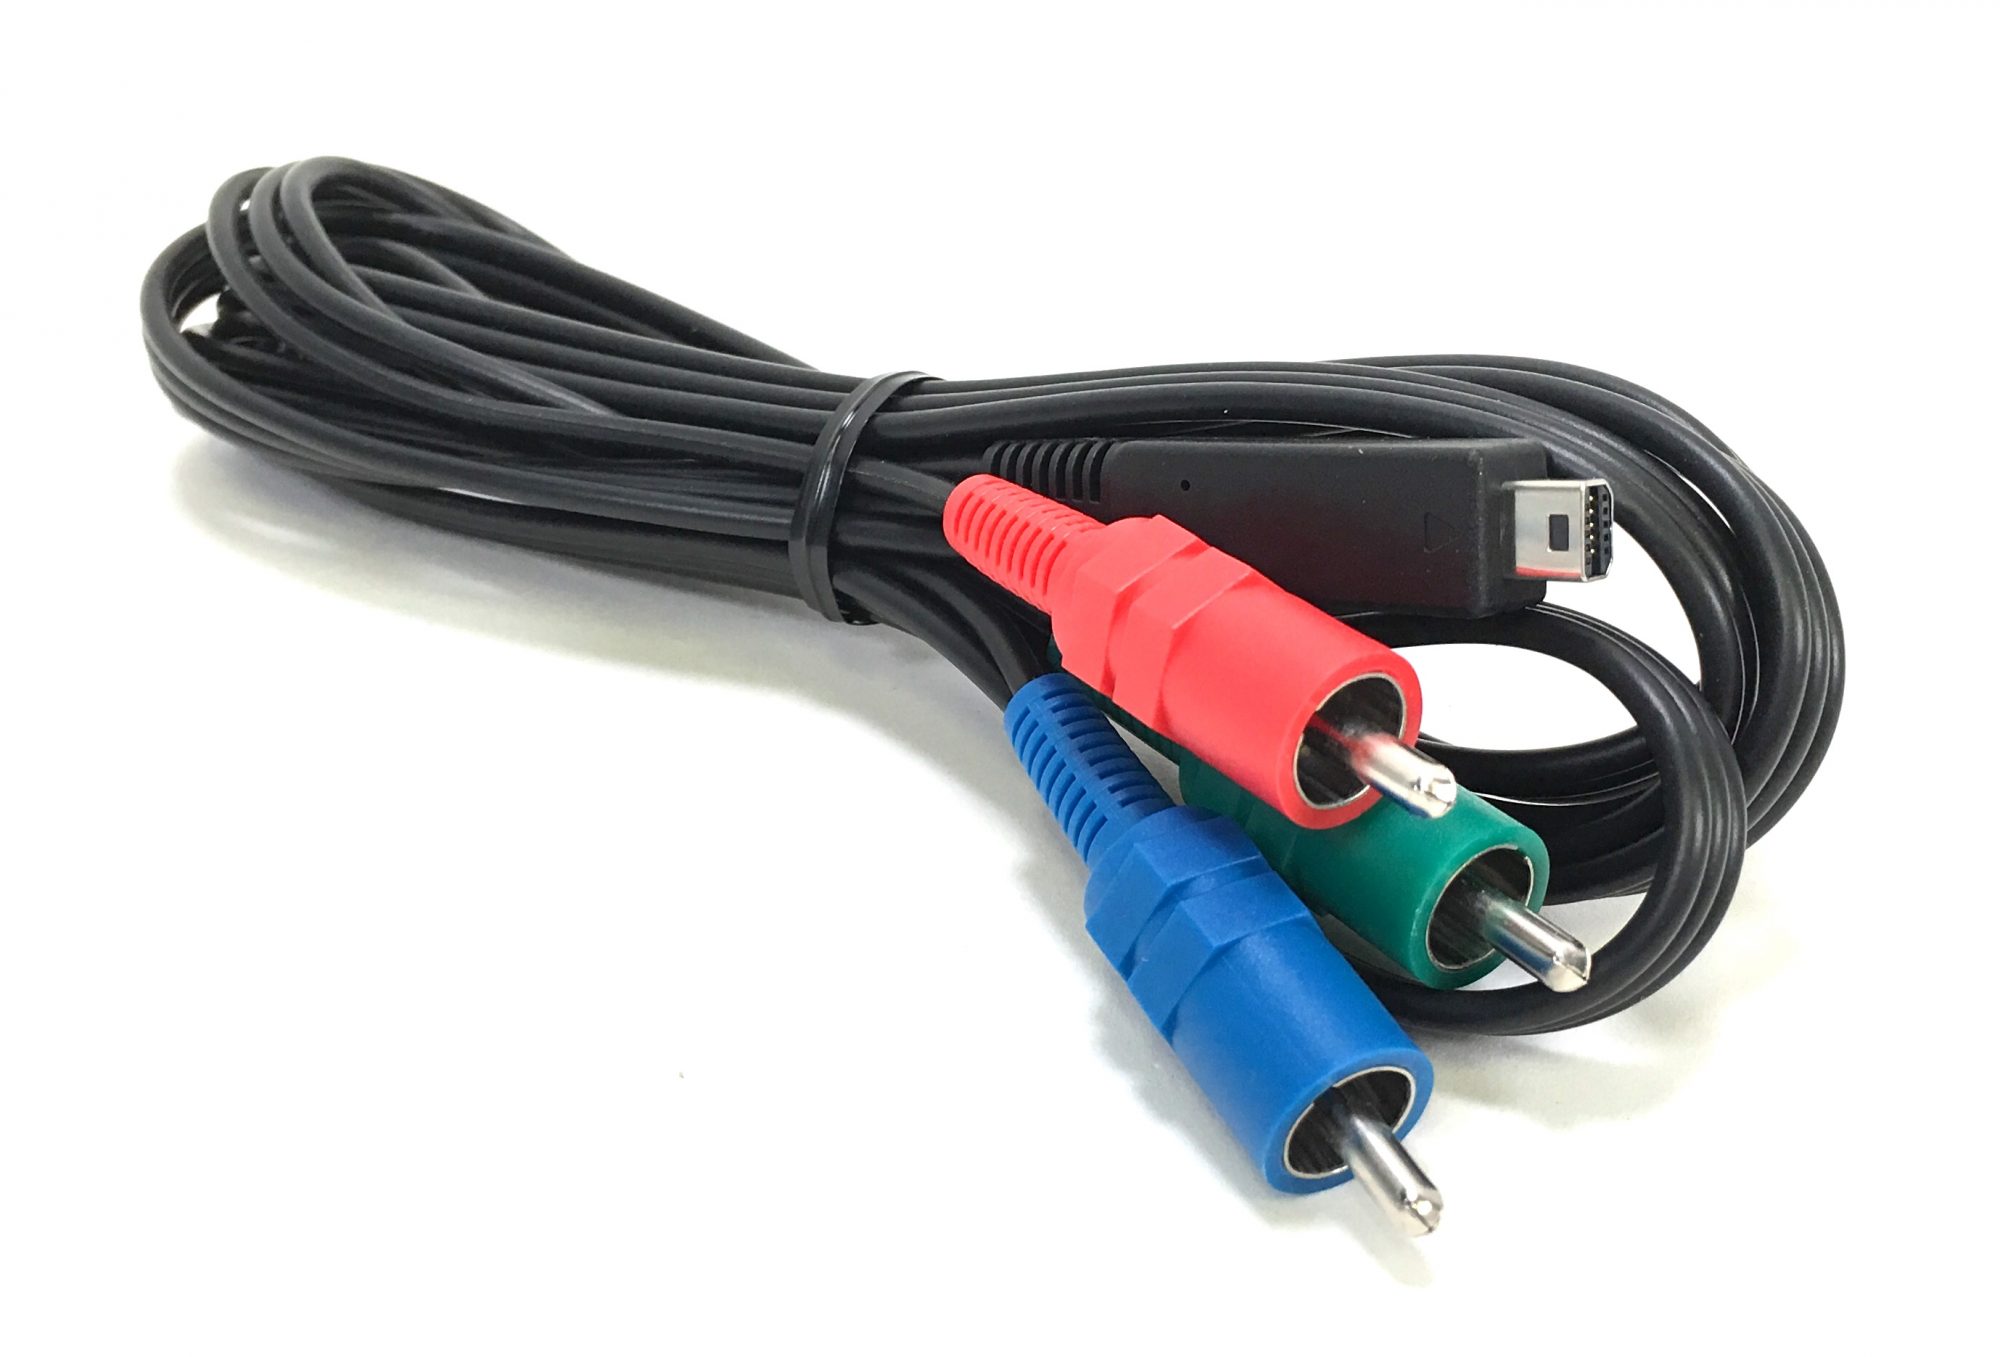 Original Component Video Cable that came with the Sony HXR-NX5U camcorder. It is a genuine Sony part, sourced directly from Sony USA. Brand new factory fresh. Free Shipping.